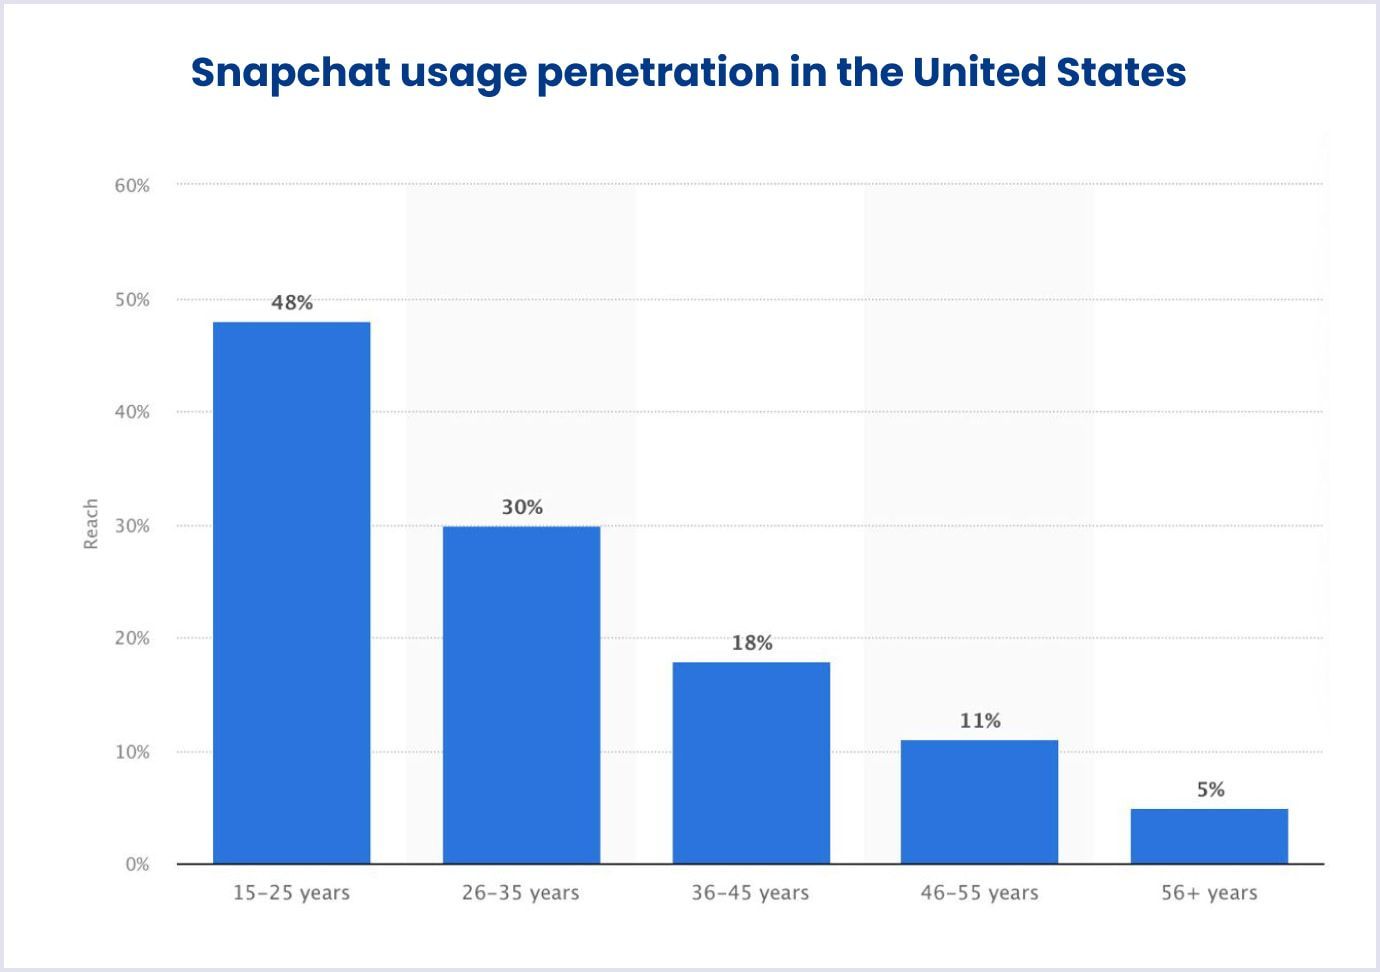 Percentage of U.S. internet users who use Snapchat